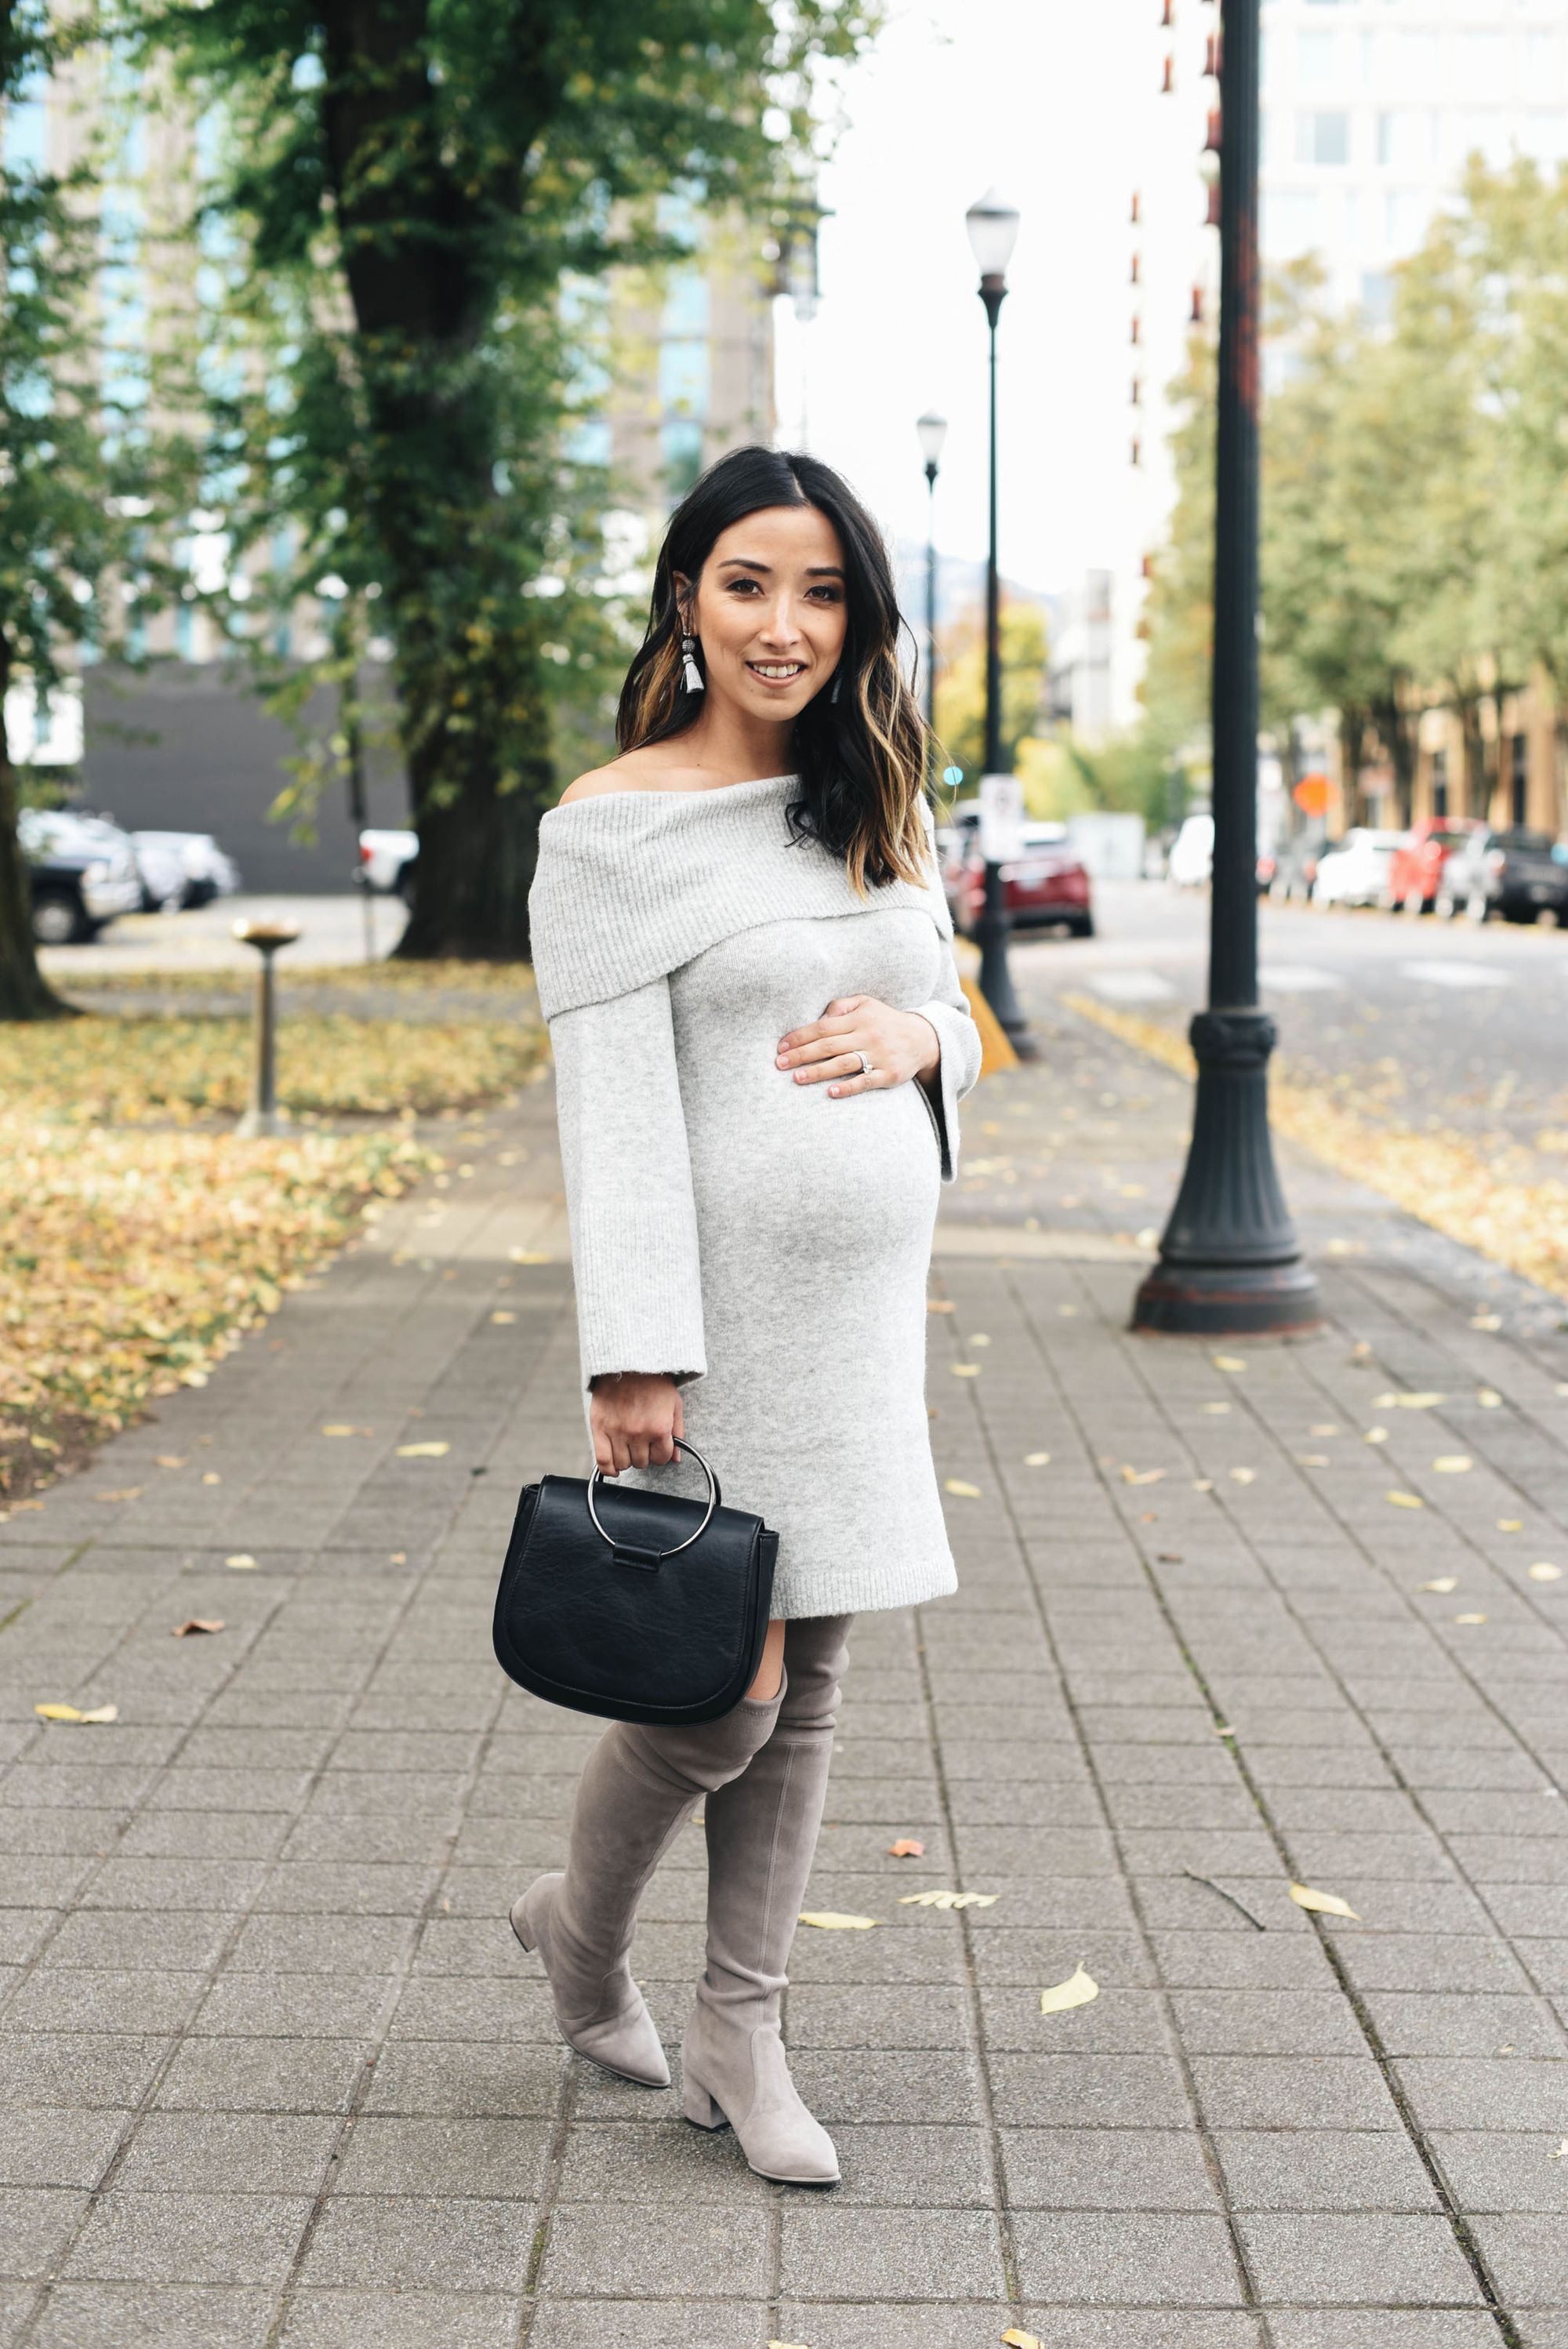 Petite Maternity Fashion - A How-To Guide (Part 1) – MARION Maternity